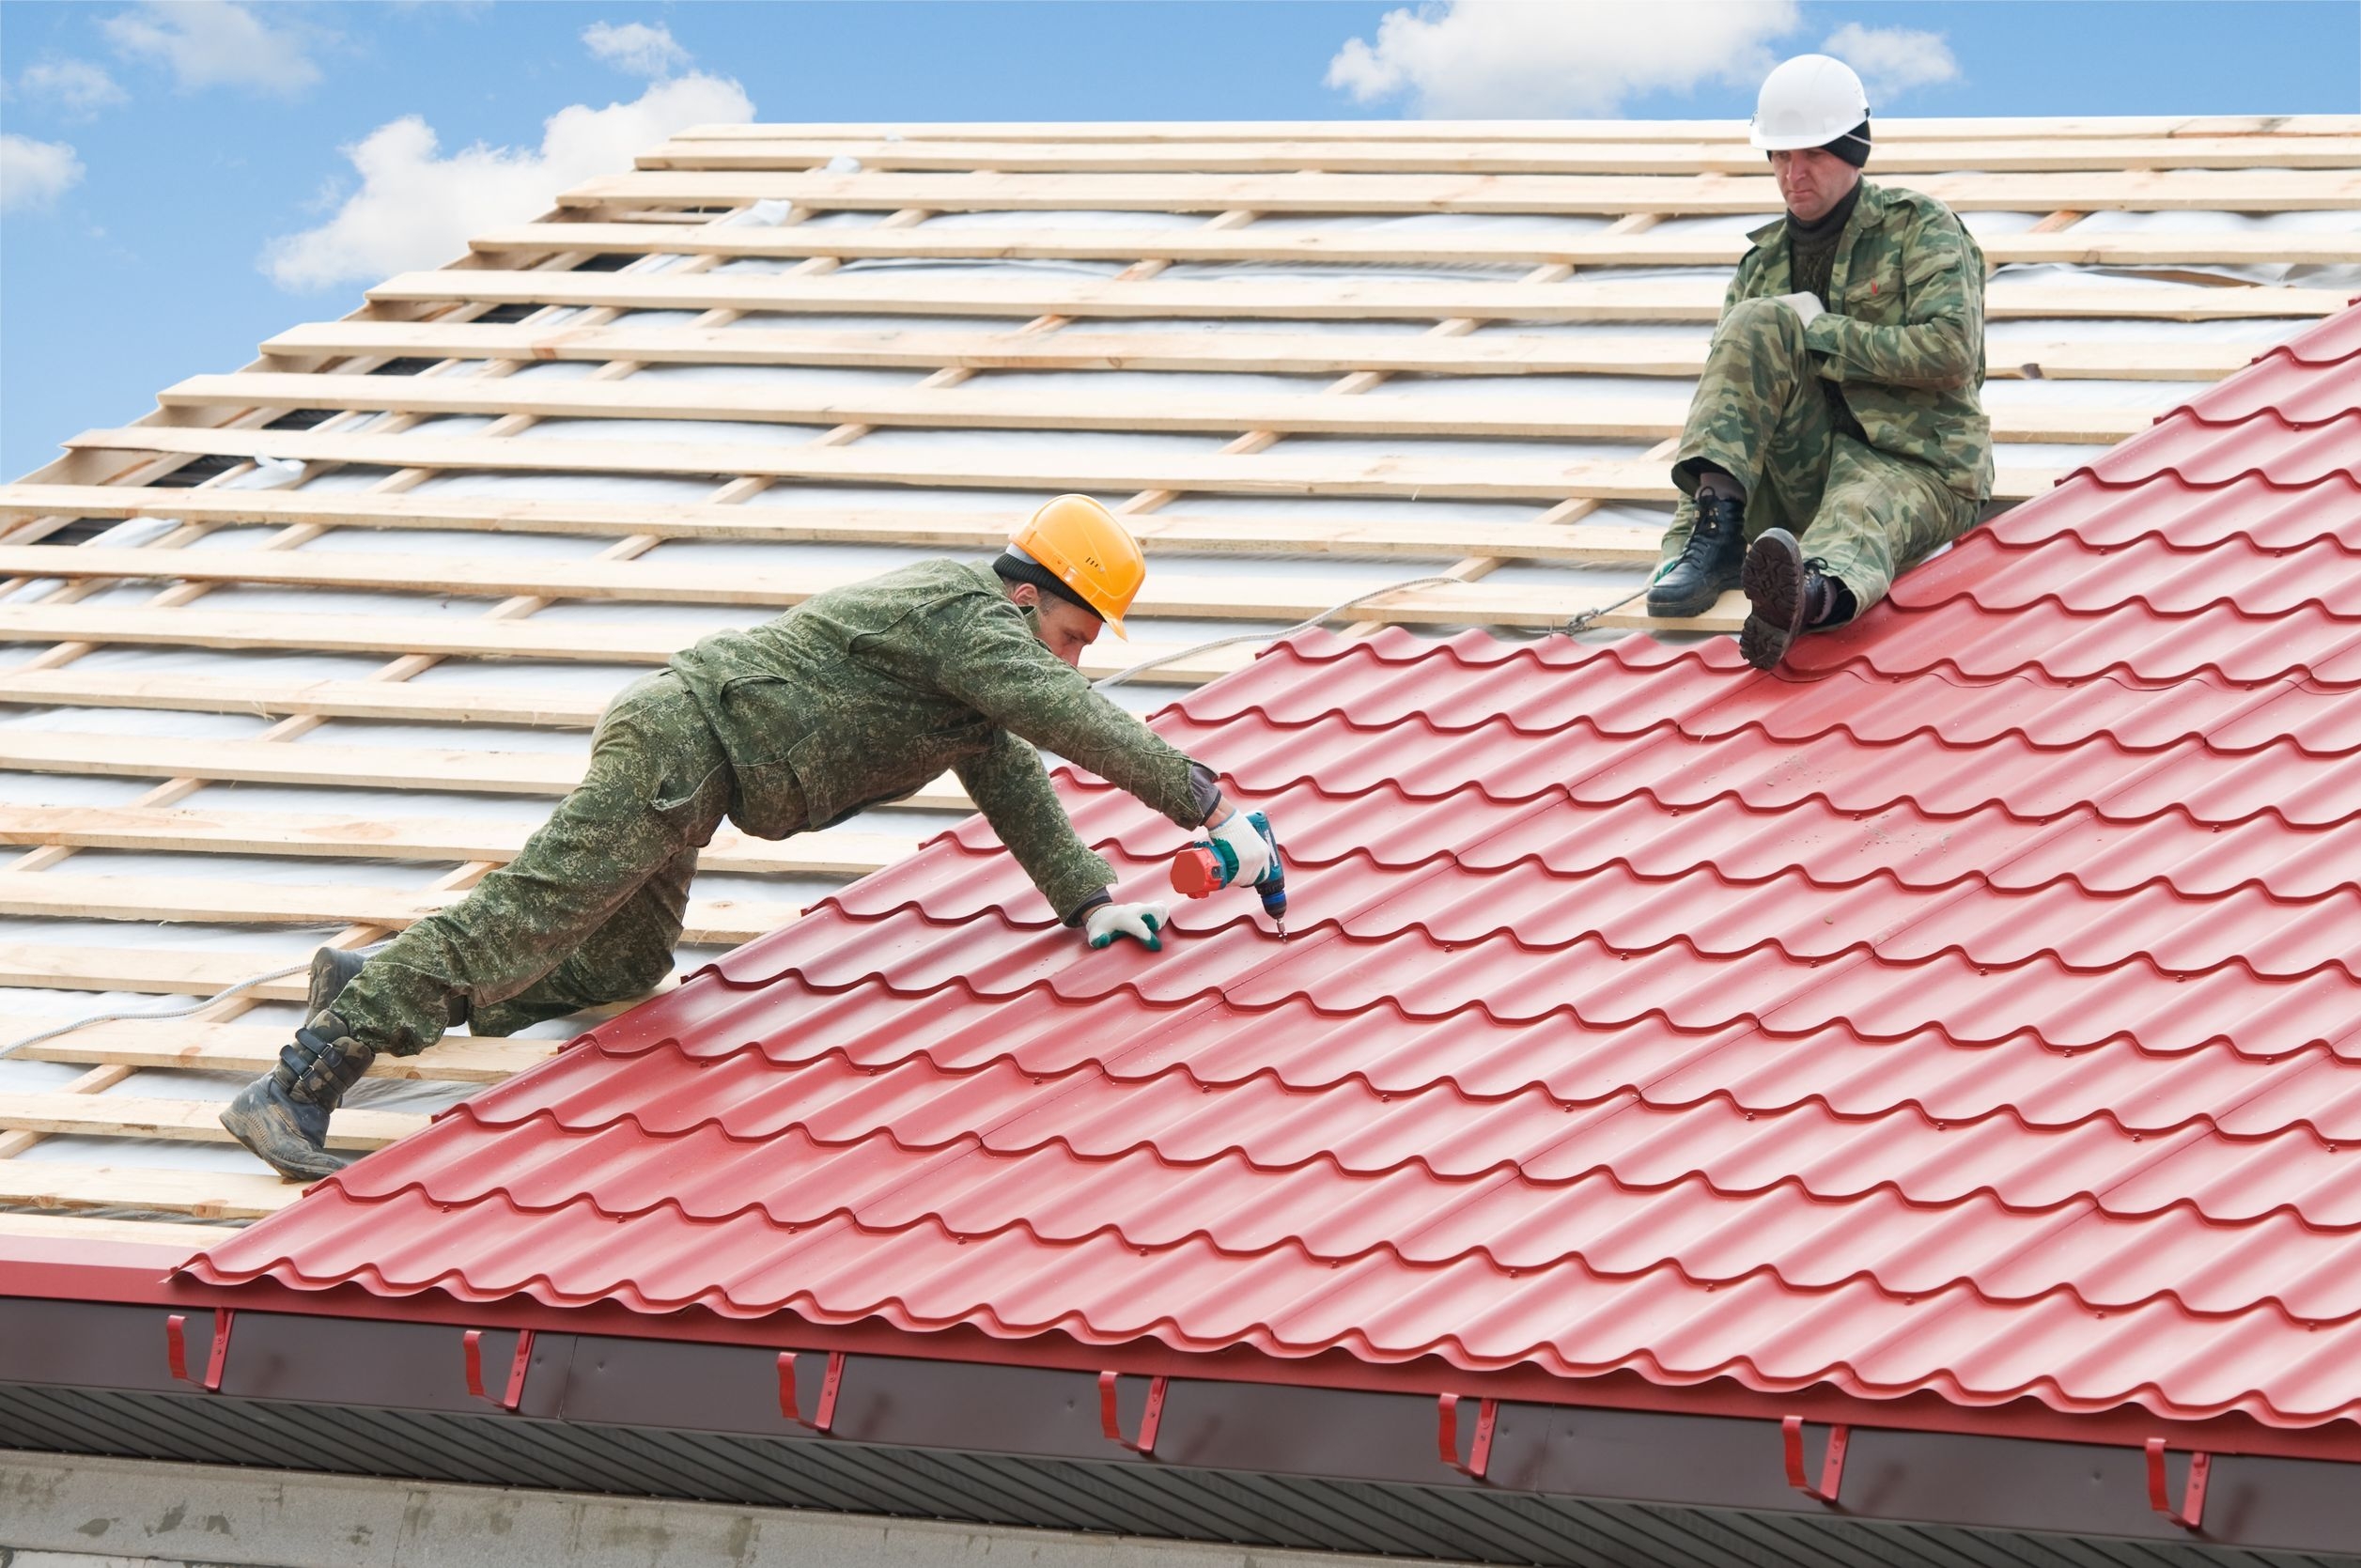 Alpha Roofing can tell you what's involved with a roof installation